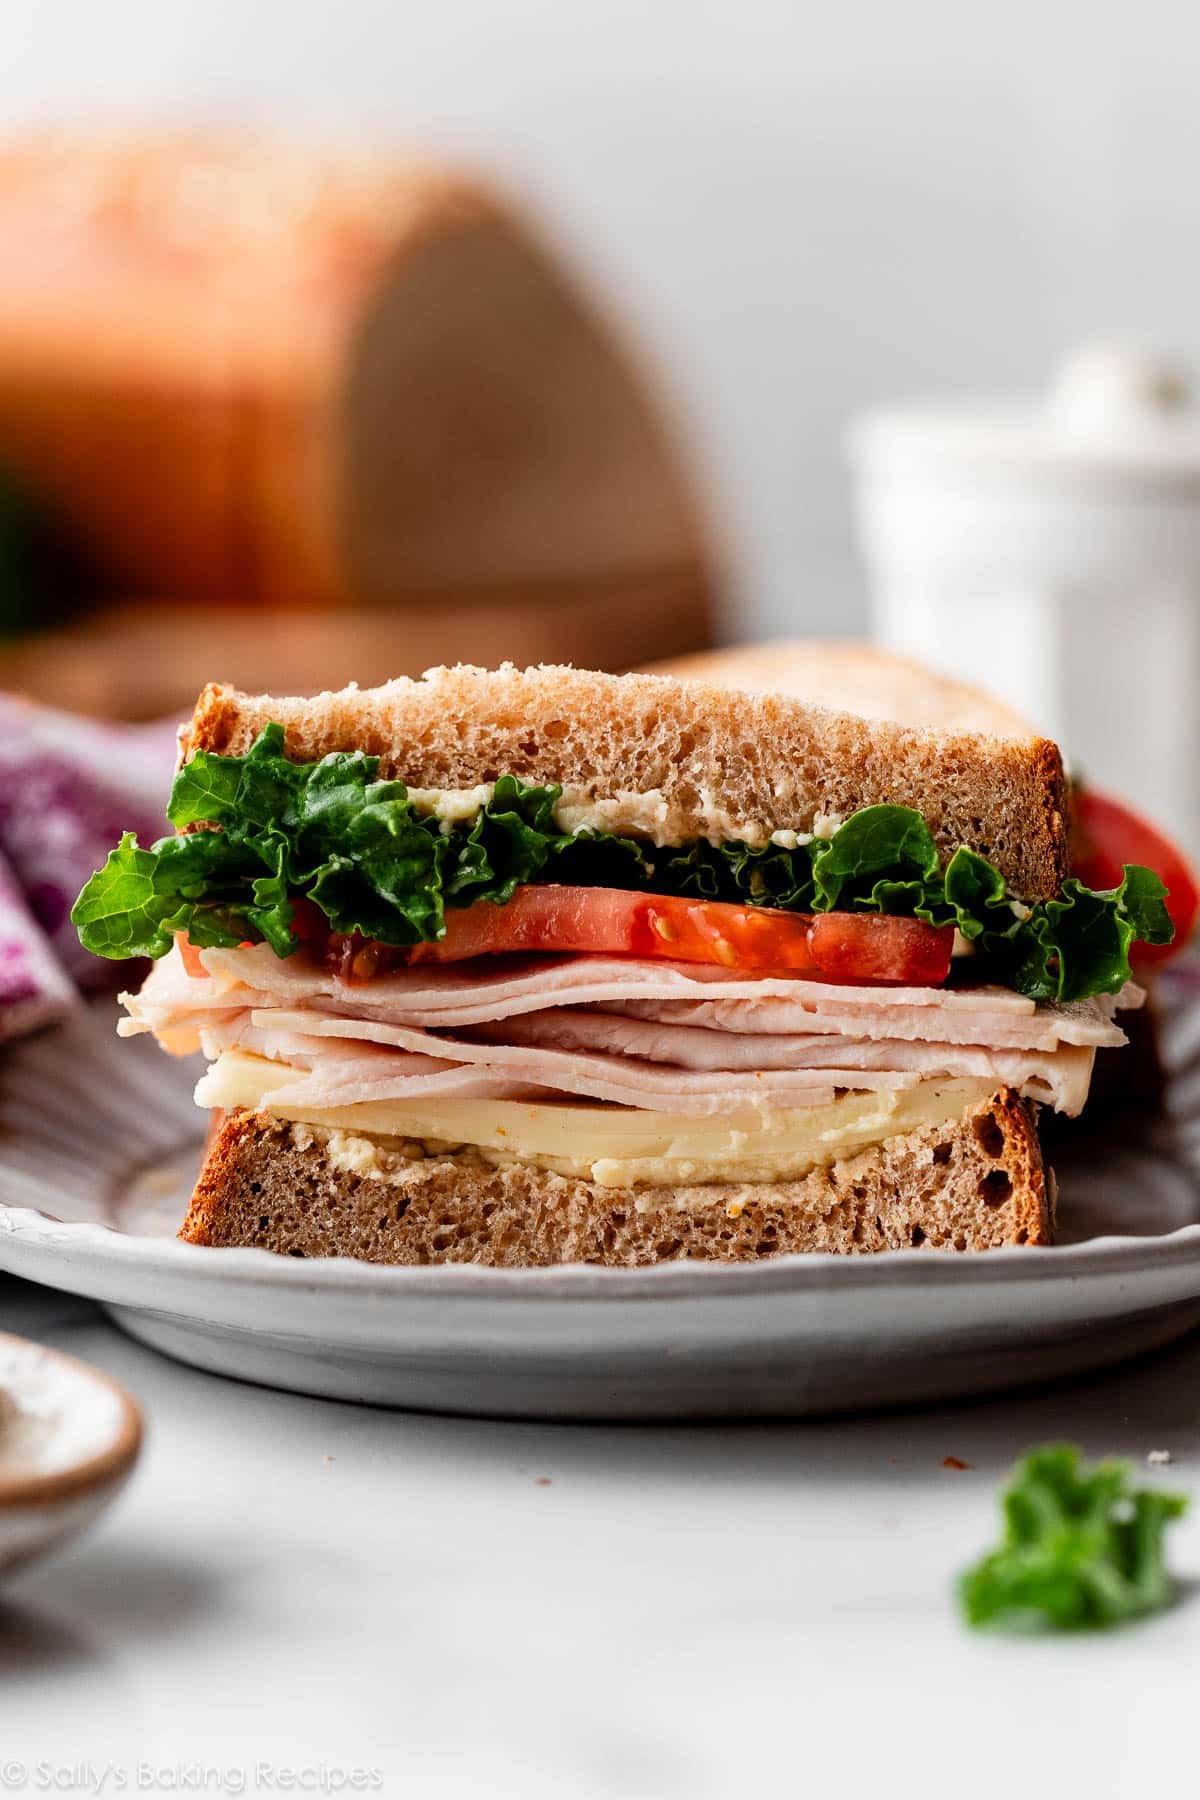 turkey, tomato, lettuce, and cheese sandwich cut open on gray plate with cut loaf of bread in background.